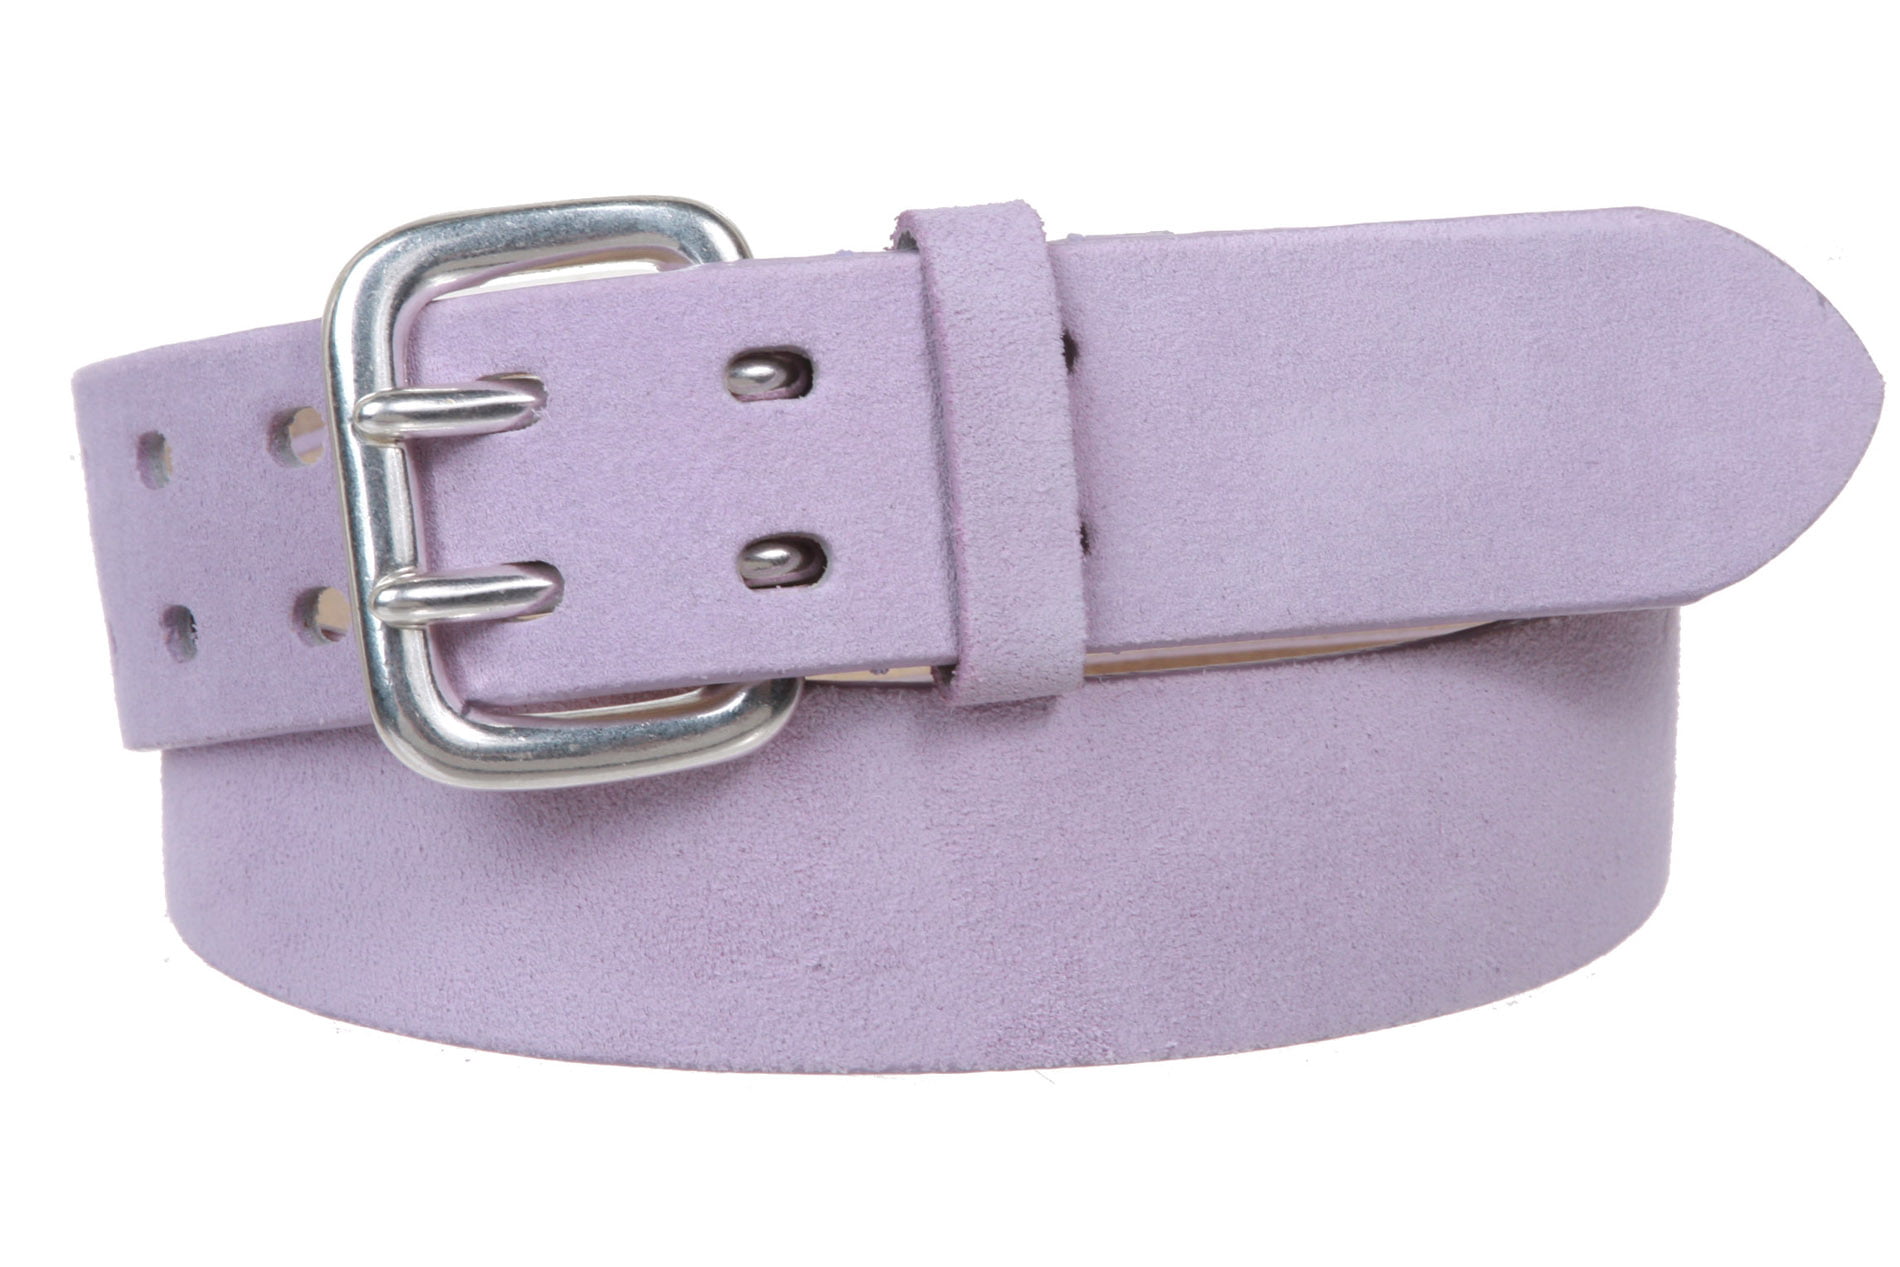 WOMEN'S SUEDE LEATHER BELT WITH FLORAL ROSE BUCKLE 1-1/2" WIDE MULTIPLE COLORS